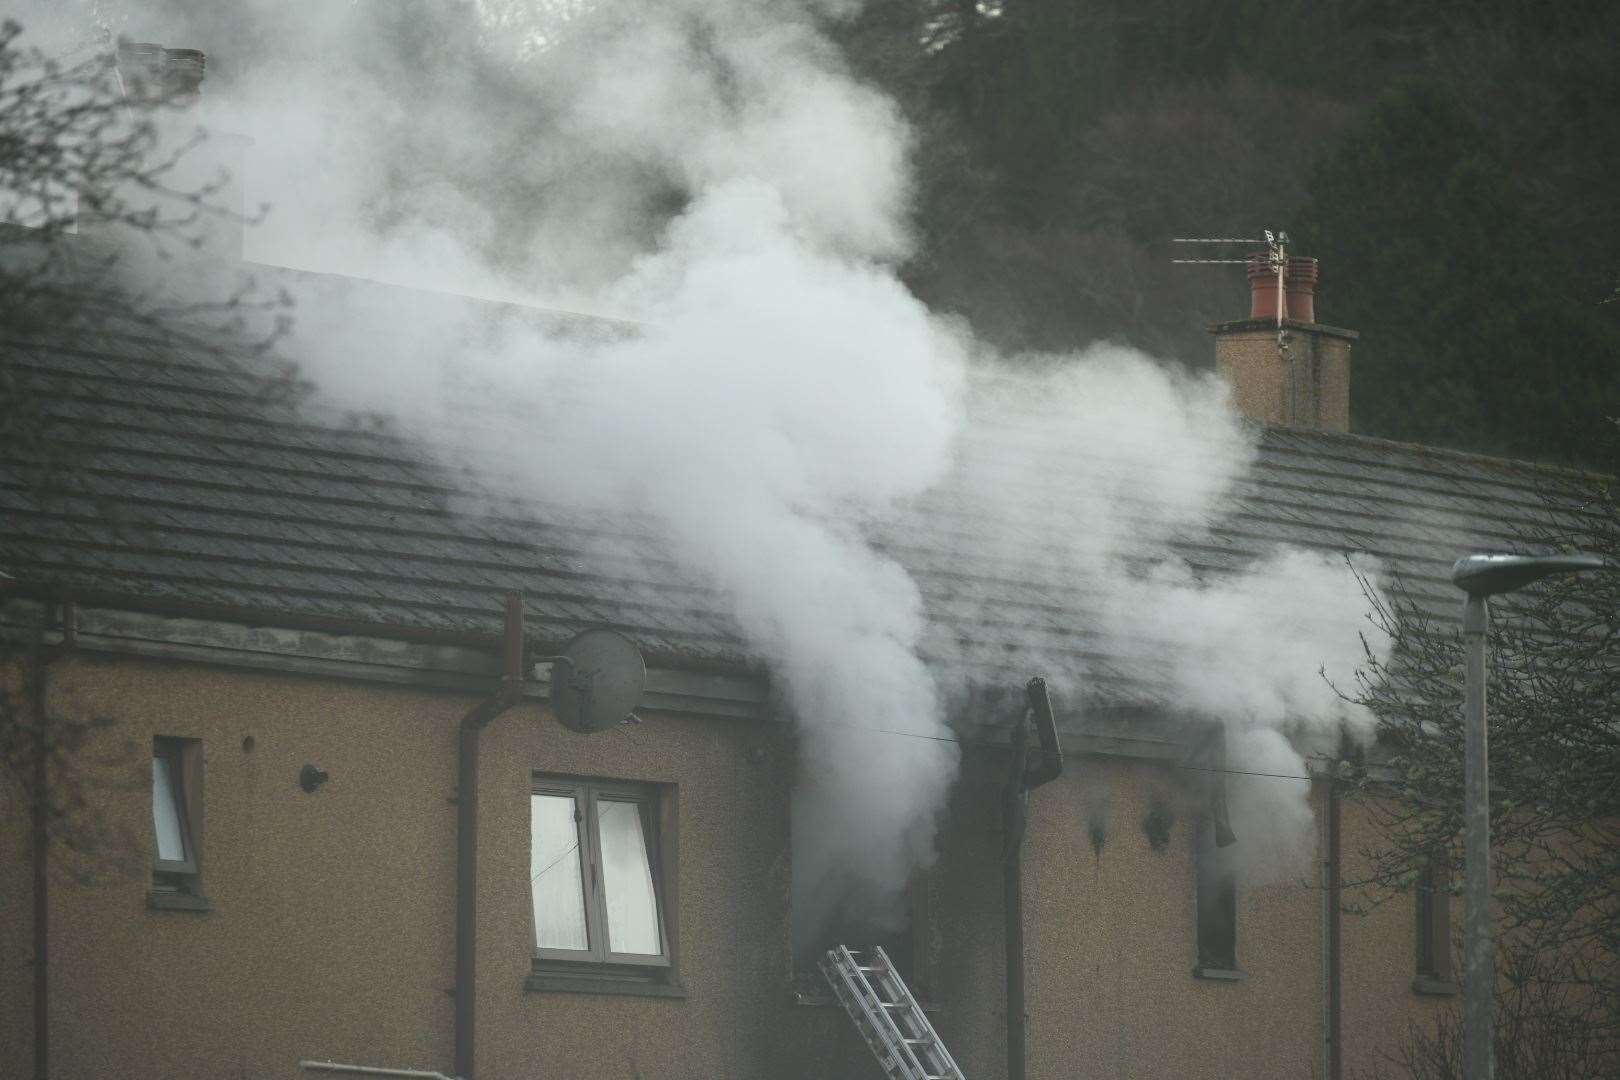 The fire at St Valery Avenue, Dalneigh